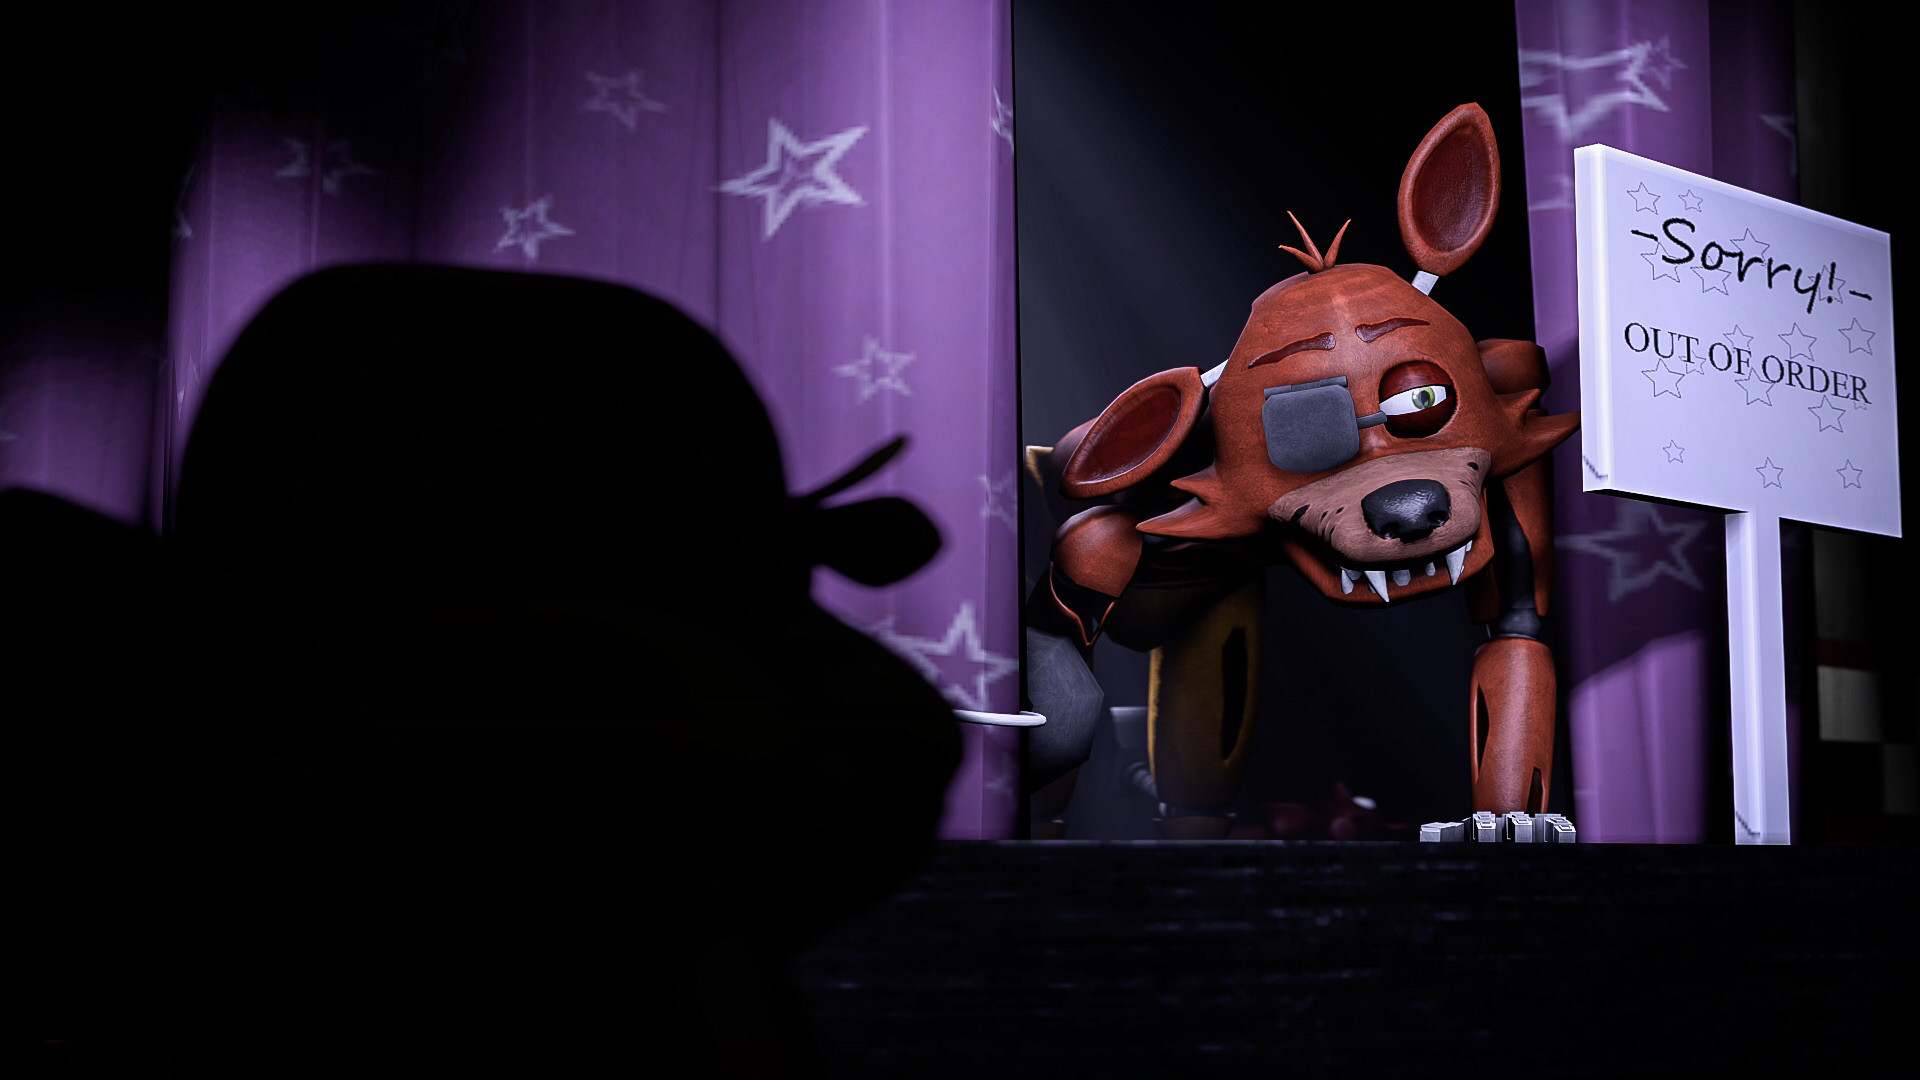 Check out new FNAF Wallpapers –